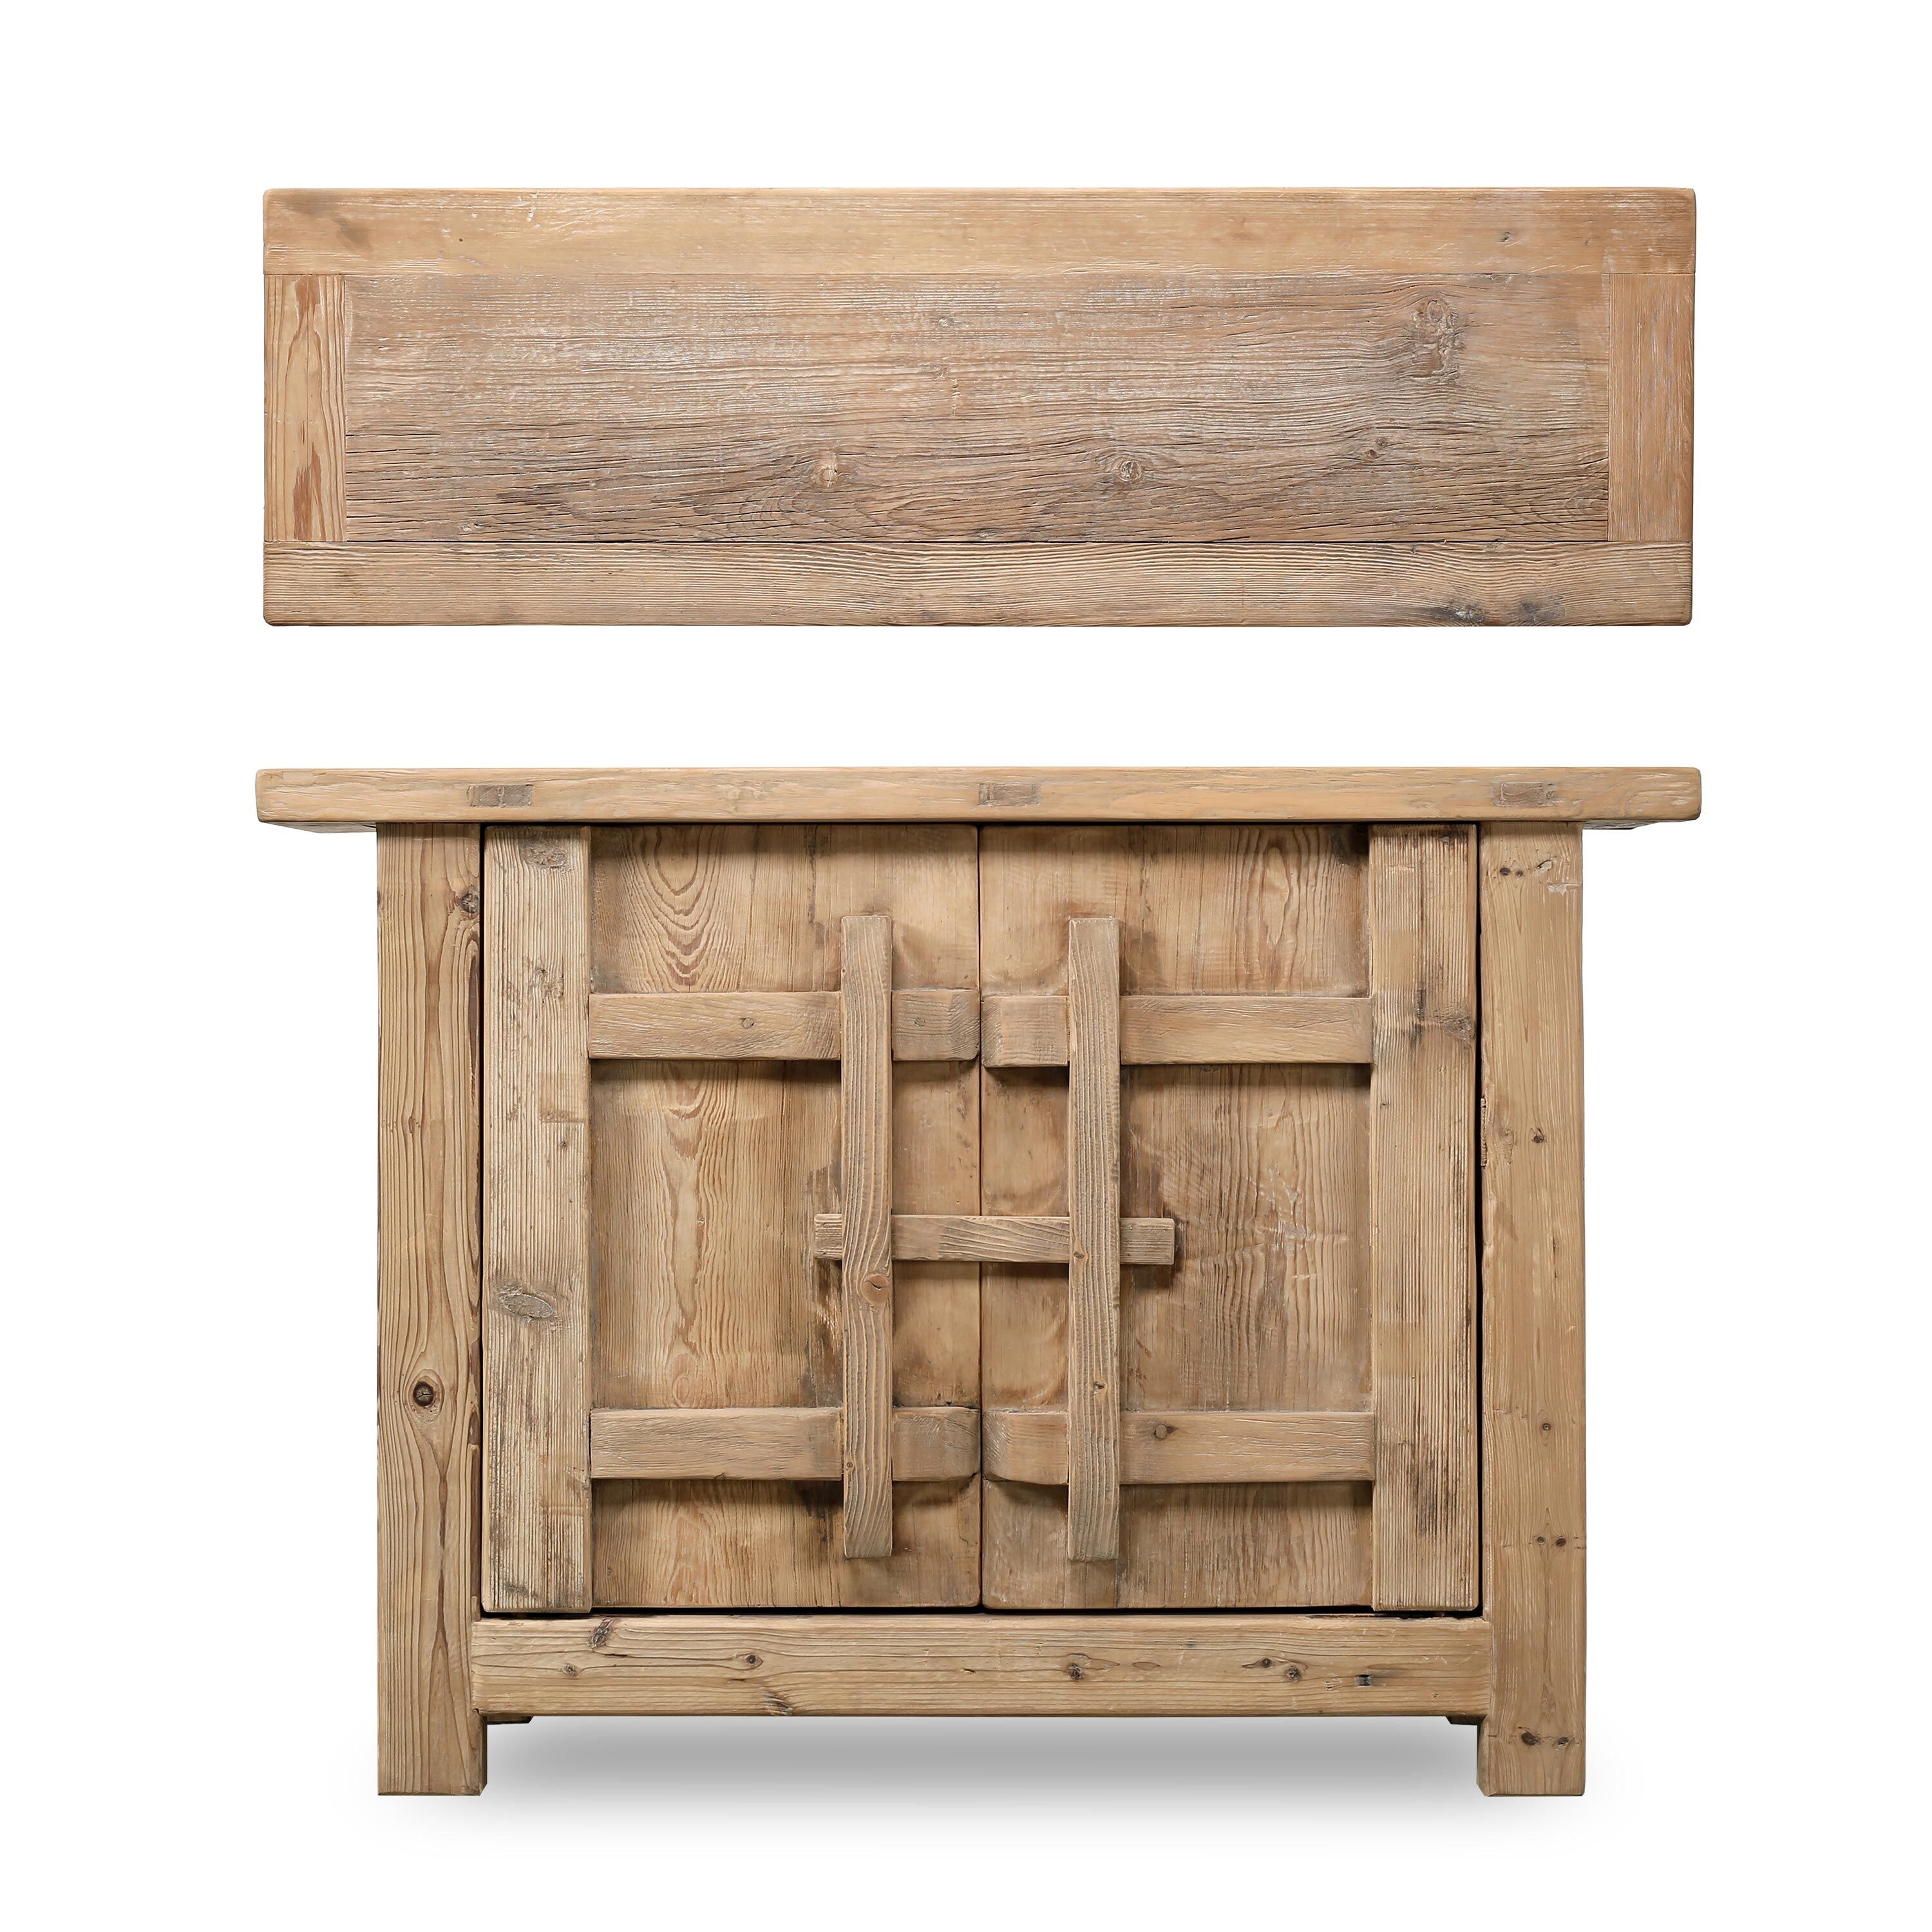 Artissance Amalfi Patrician One Door Cabinet, Weathered Natural 51x16x37H